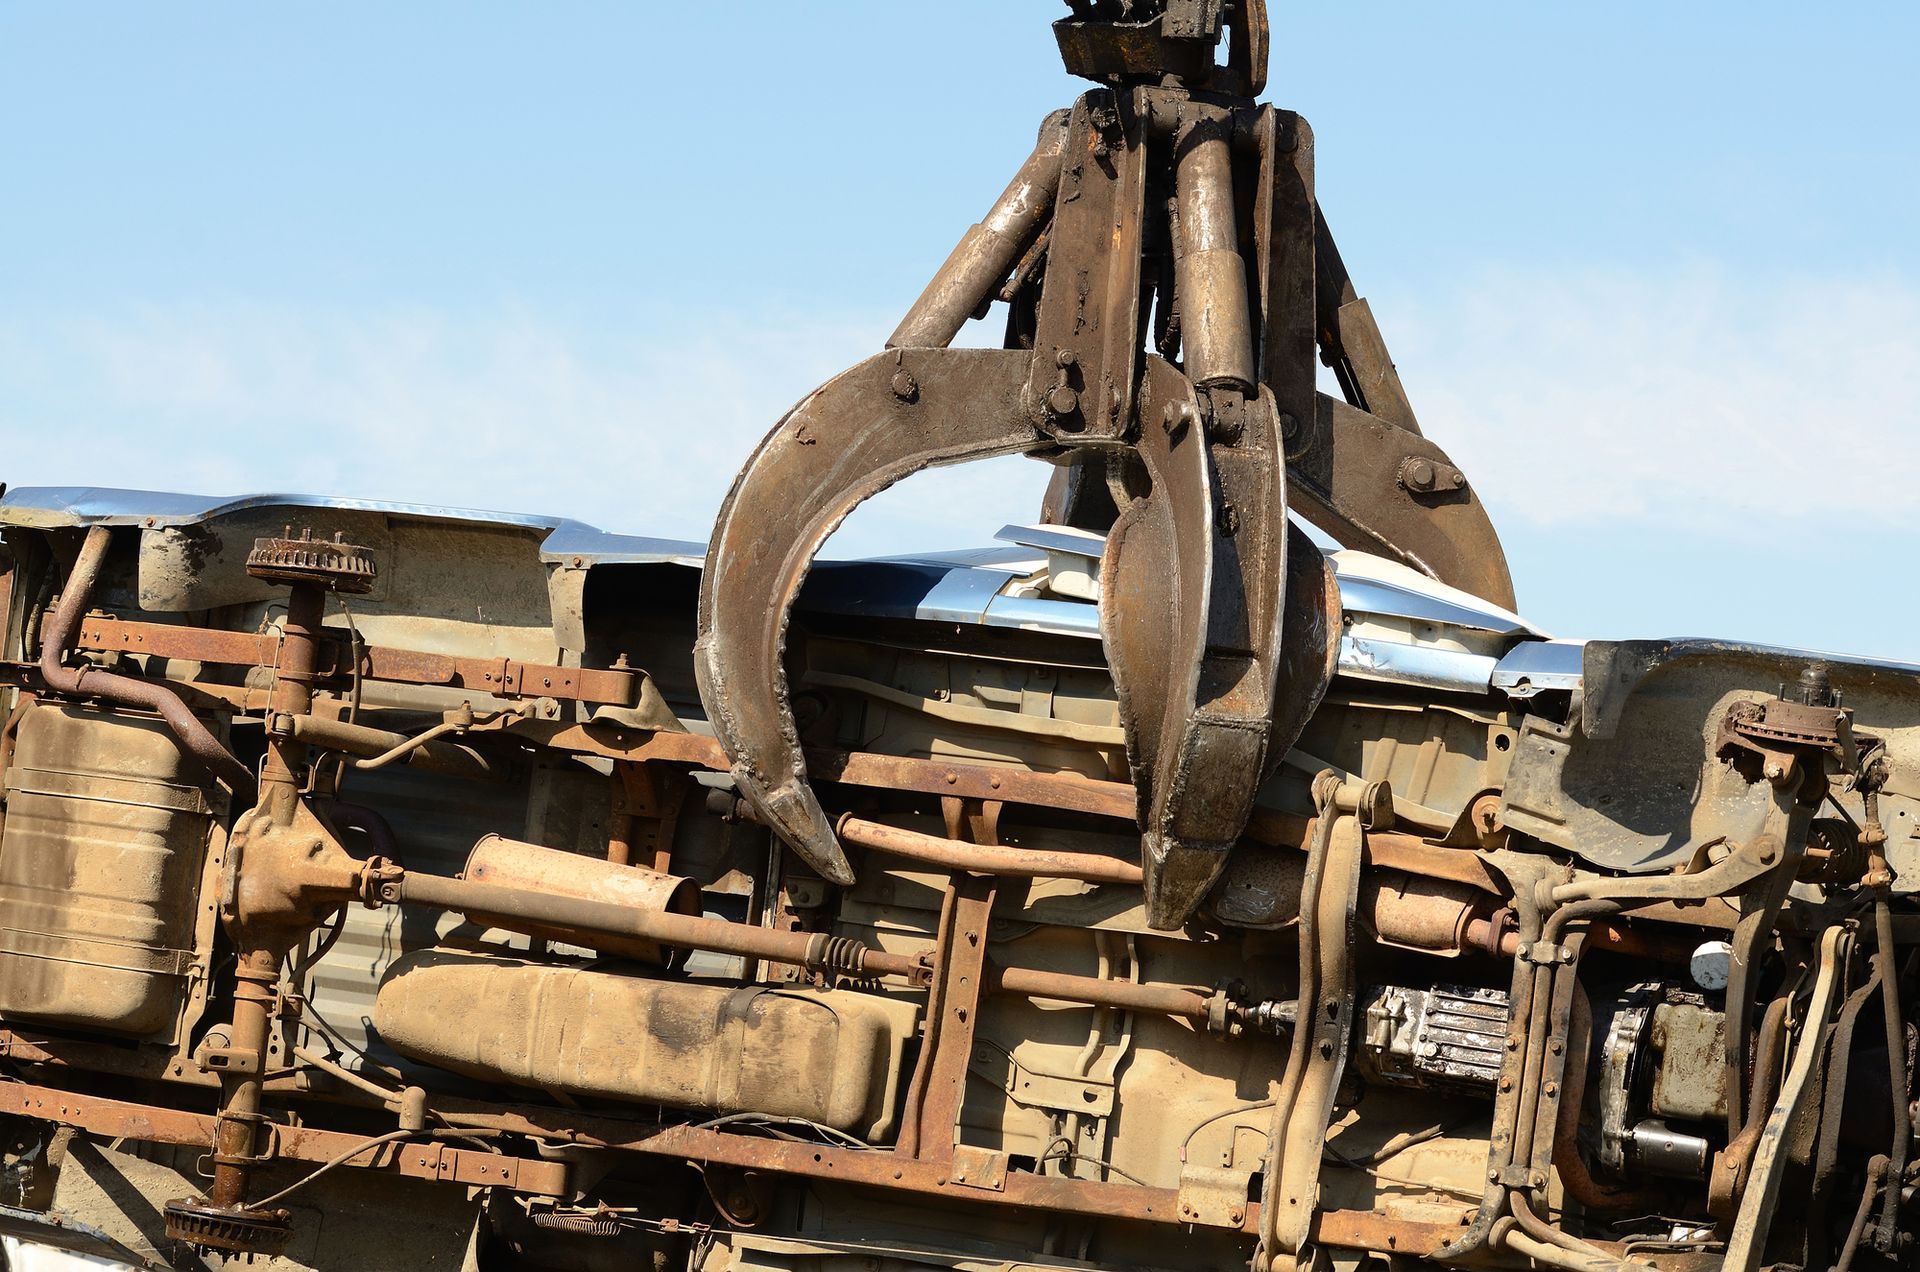 Let's uncover the daily operations of a scrap yard